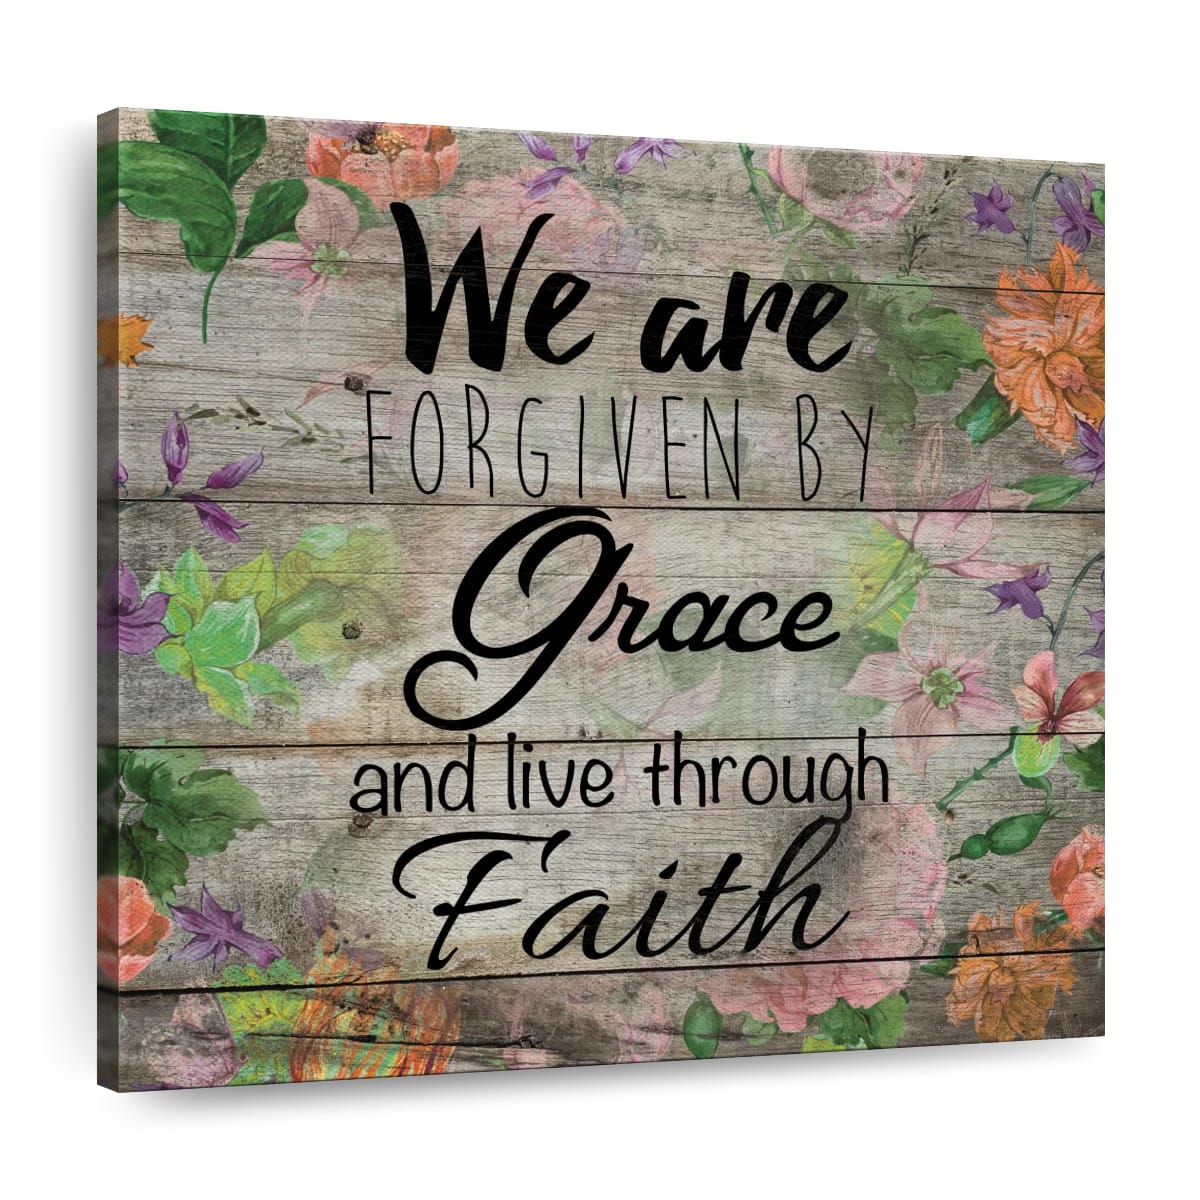 Grace And Faith II Square Canvas Wall Art - Christian Wall Decor - Christian Wall Hanging